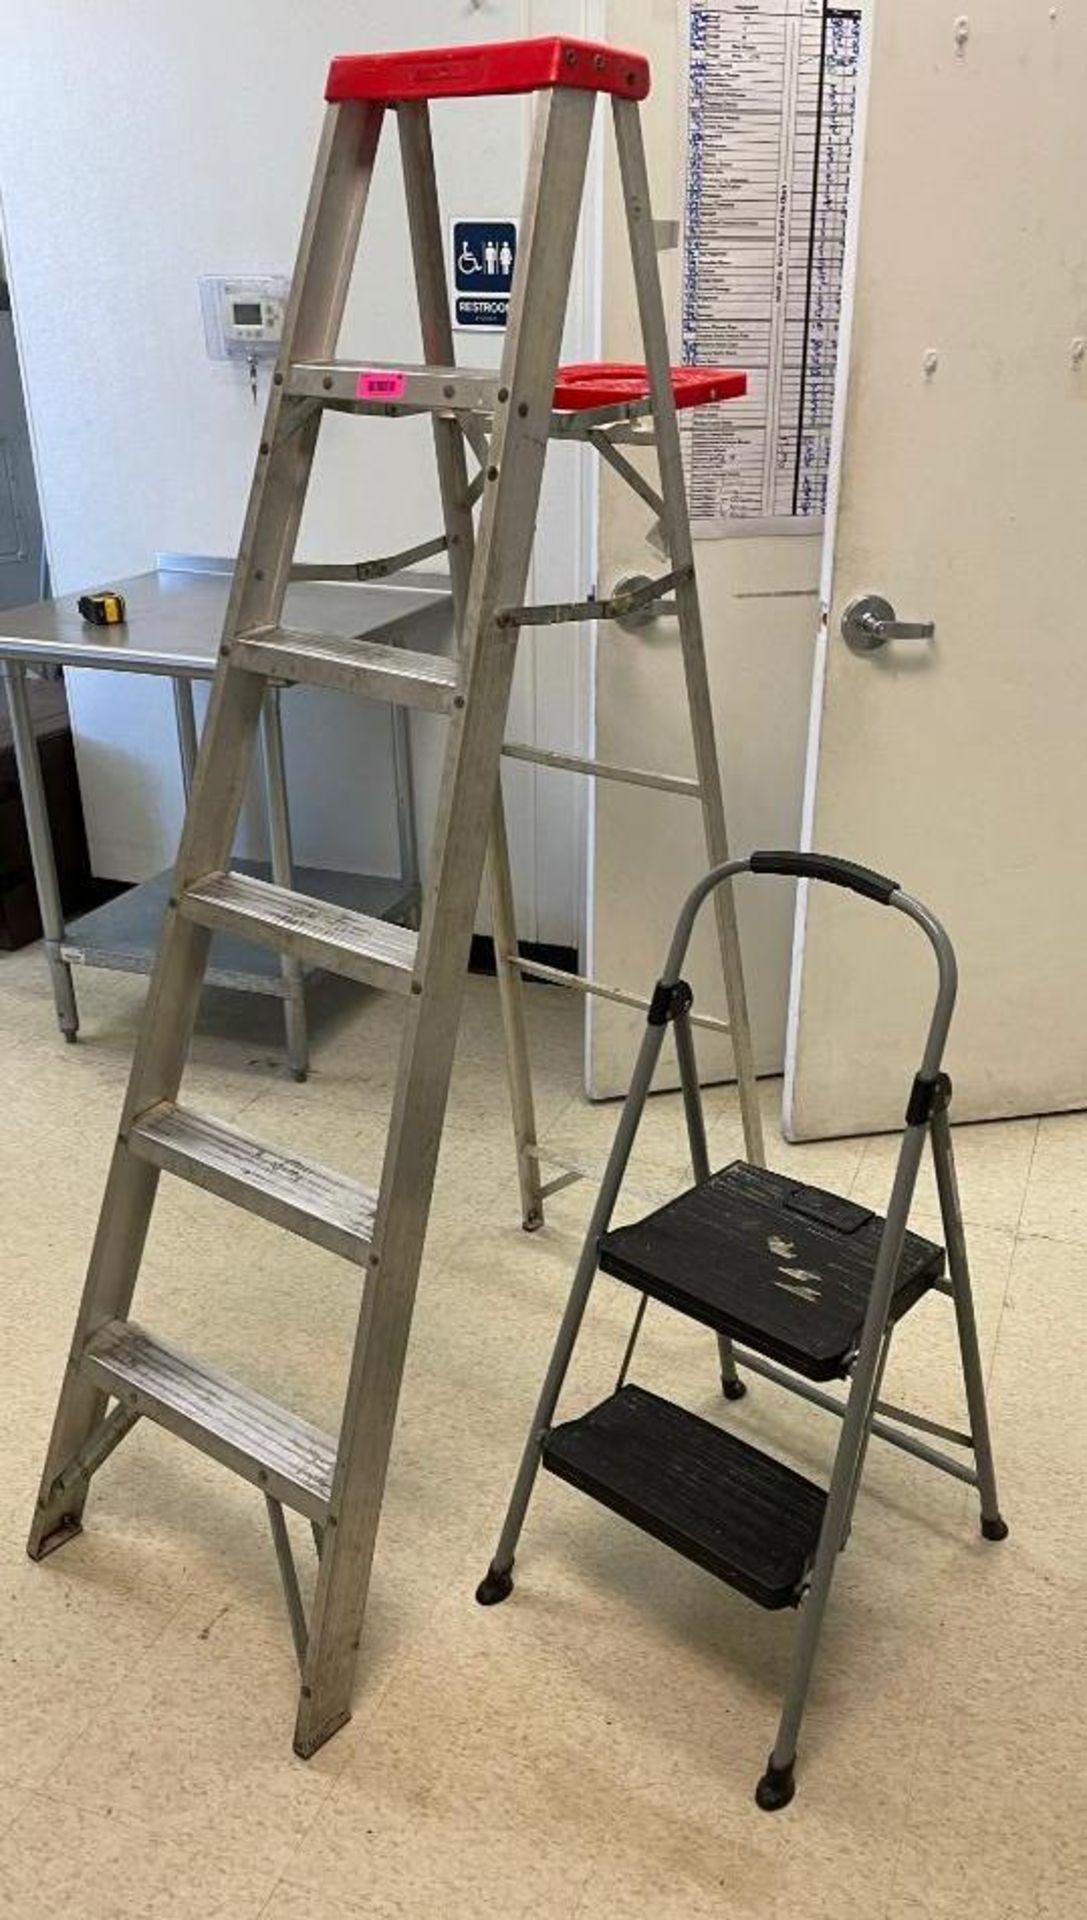 DESCRIPTION: (2) ASSORTED LADDERS. ADDITIONAL INFORMATION ONE MONEY LOCATION: 2500 S CENTER ST. MARS